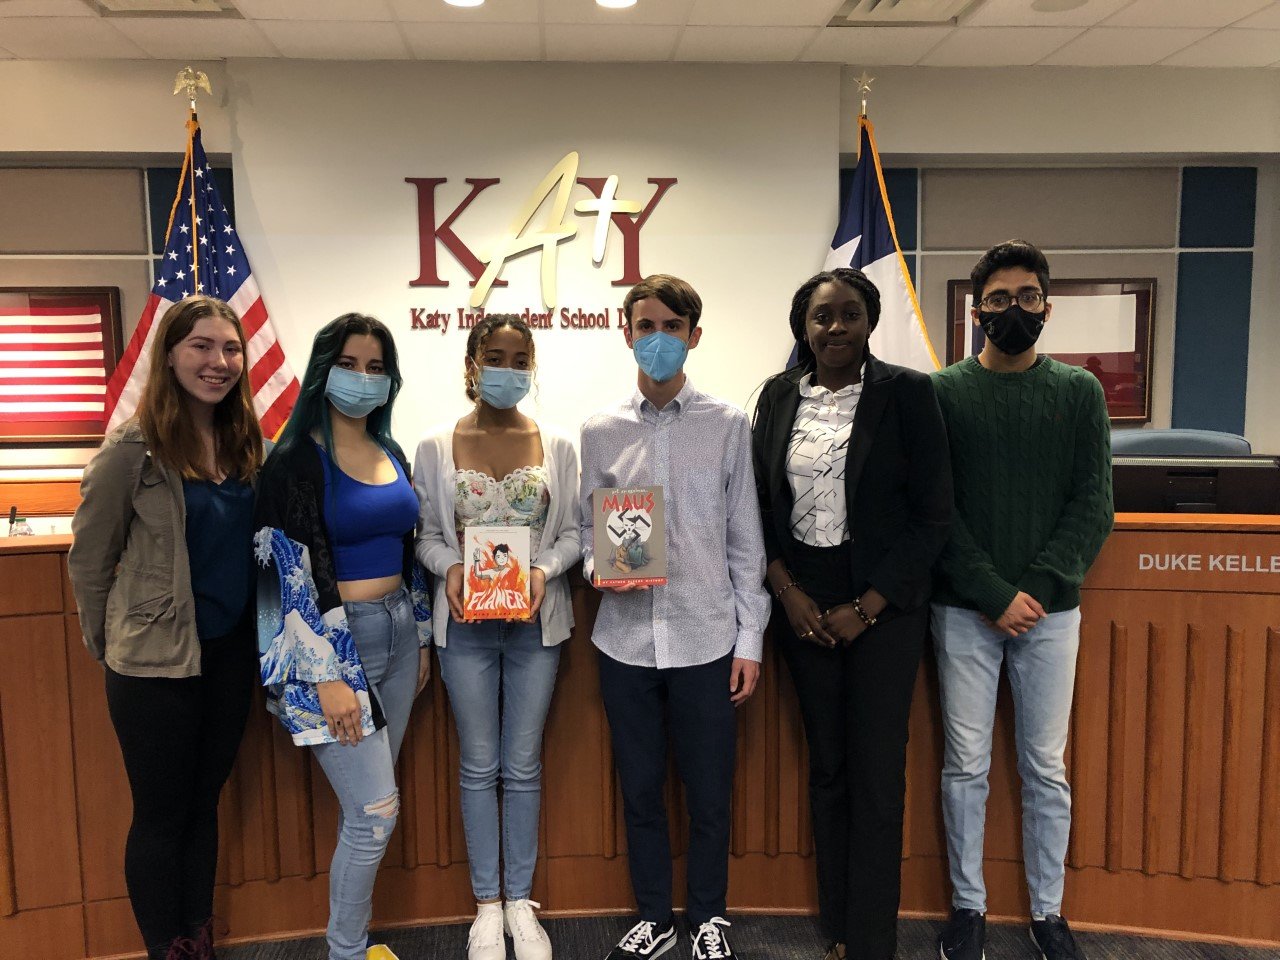 Katy ISD students, from left, Alison Franks, Sofa Dixon, Gabrielle Izu, Cameron Samuels, Peniel Otto and Jaagat Prashar have spoken against banning books and distributed such books to their fellow students. Izu is holding Flamer, a book that has been pulled from Katy ISD library shelves. Samuels is holding Maus, which the district is considering removing from the shelves. A district spokesperson said a decision on whether to pull Maus will come later in the week.